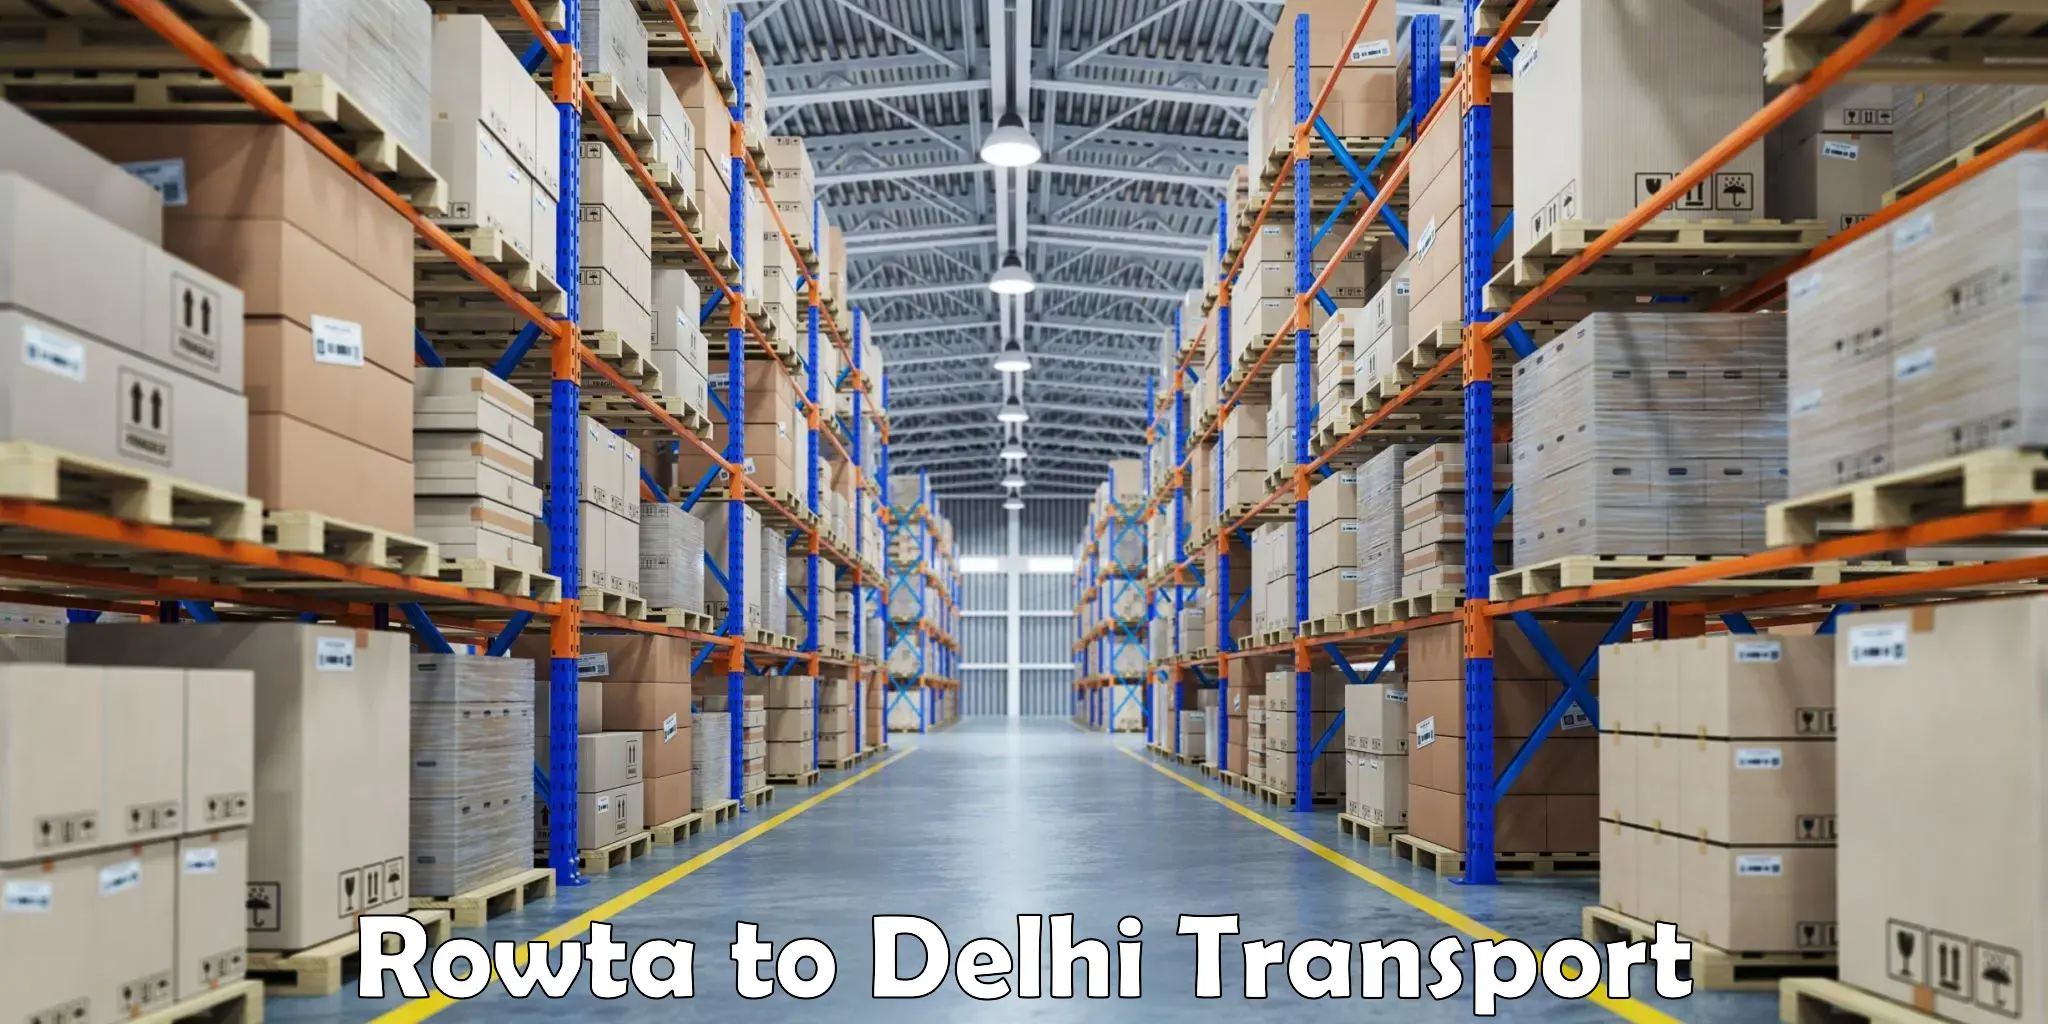 Air freight transport services Rowta to NCR